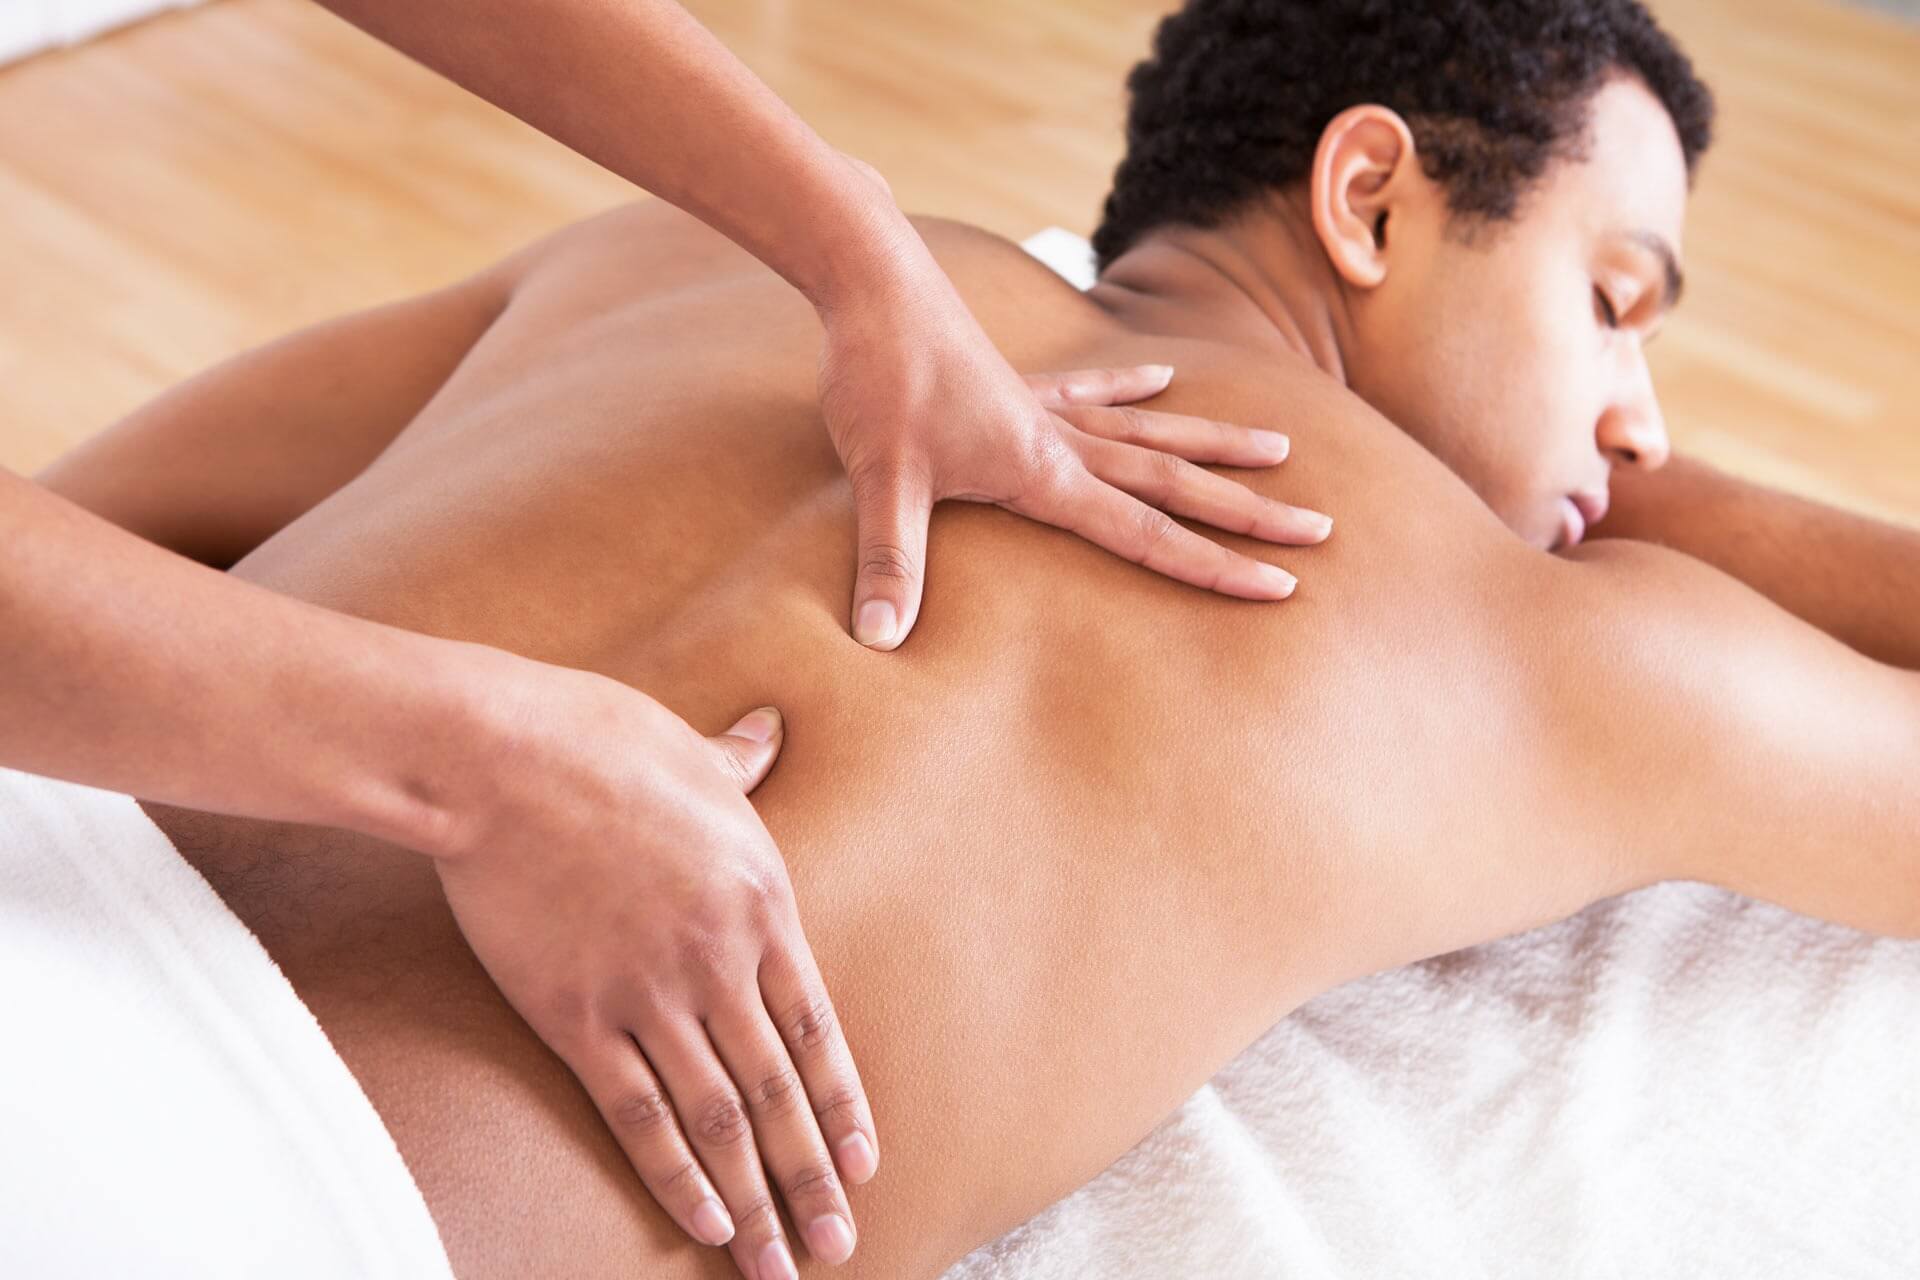 Acupressure massage therapy helps reduce stress and fatigue